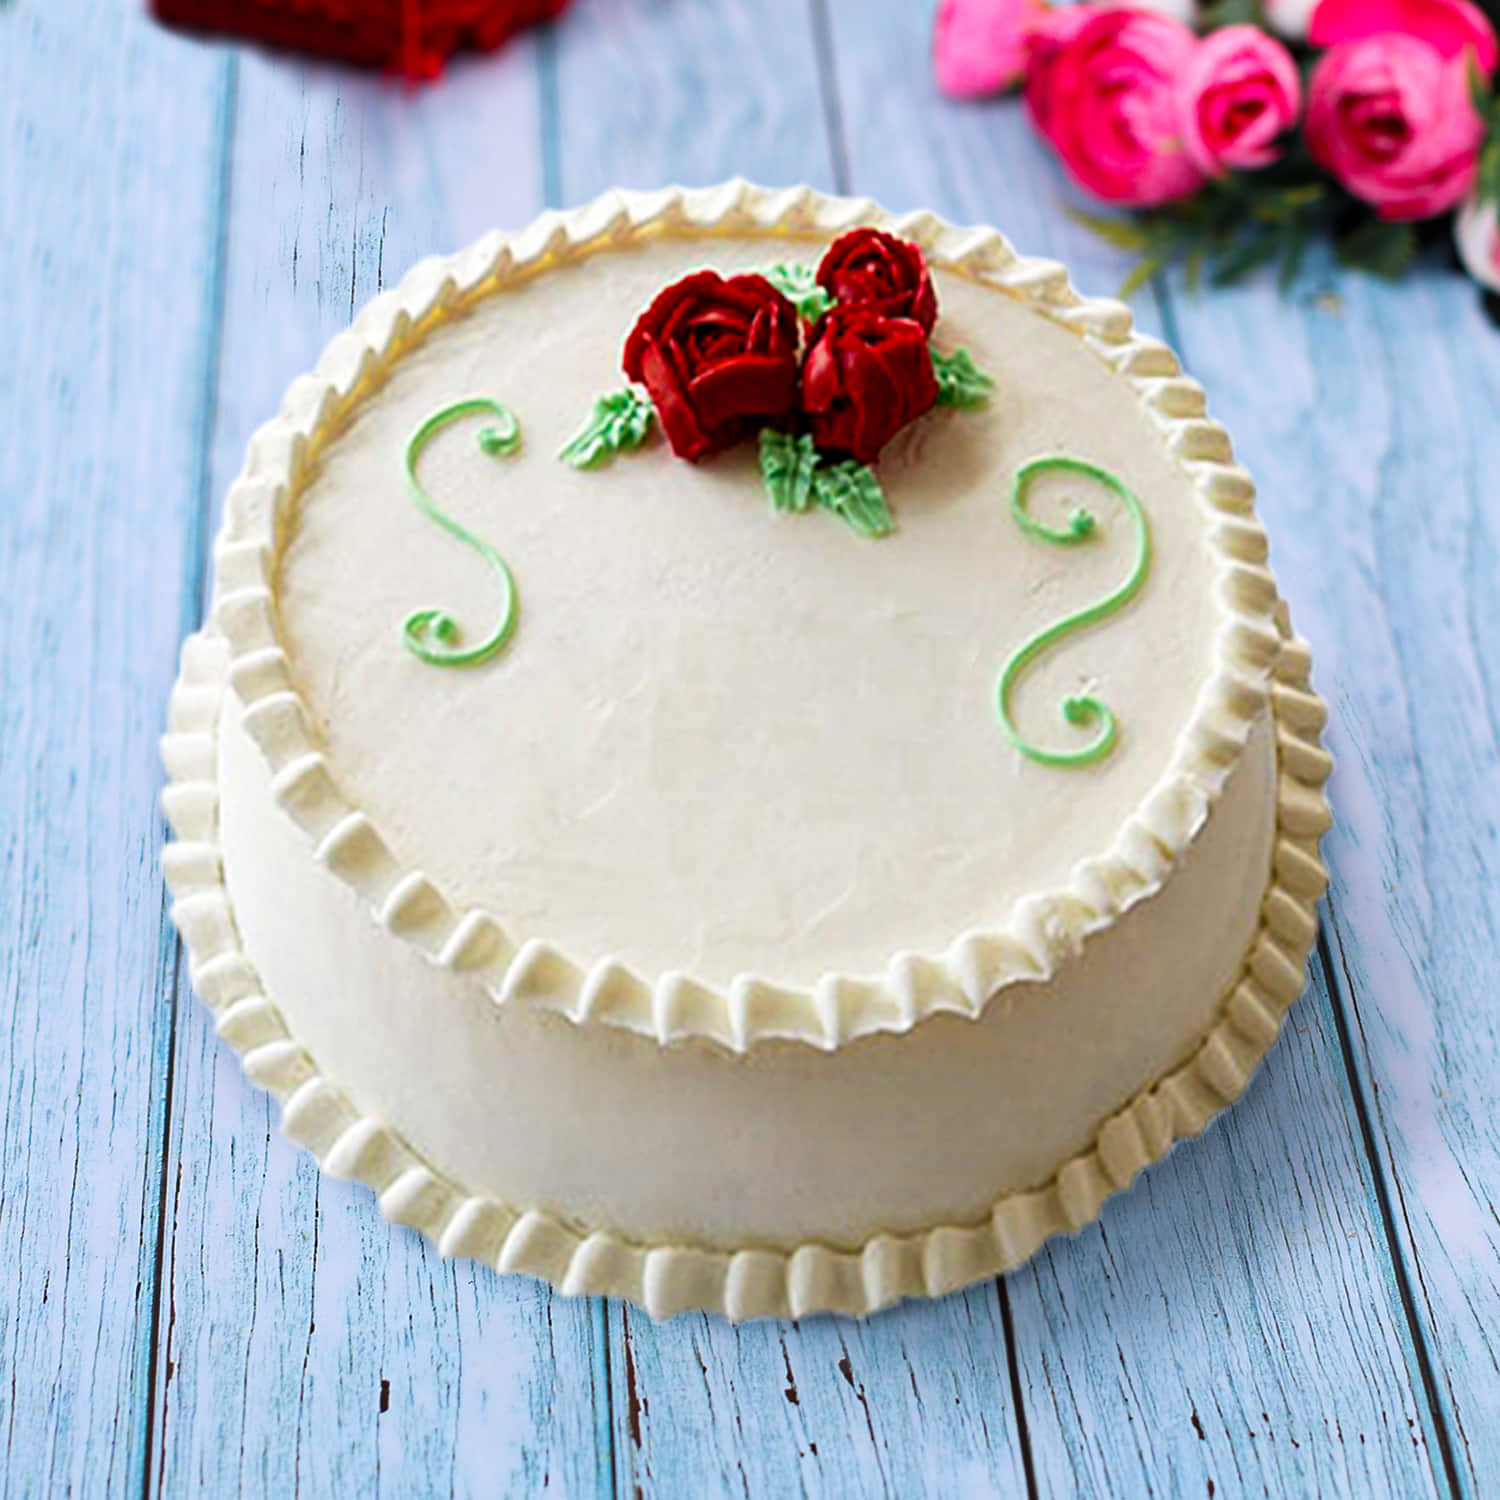 Buy 5 Pound S Letter Cake online from Favourite Food Centre - FFC